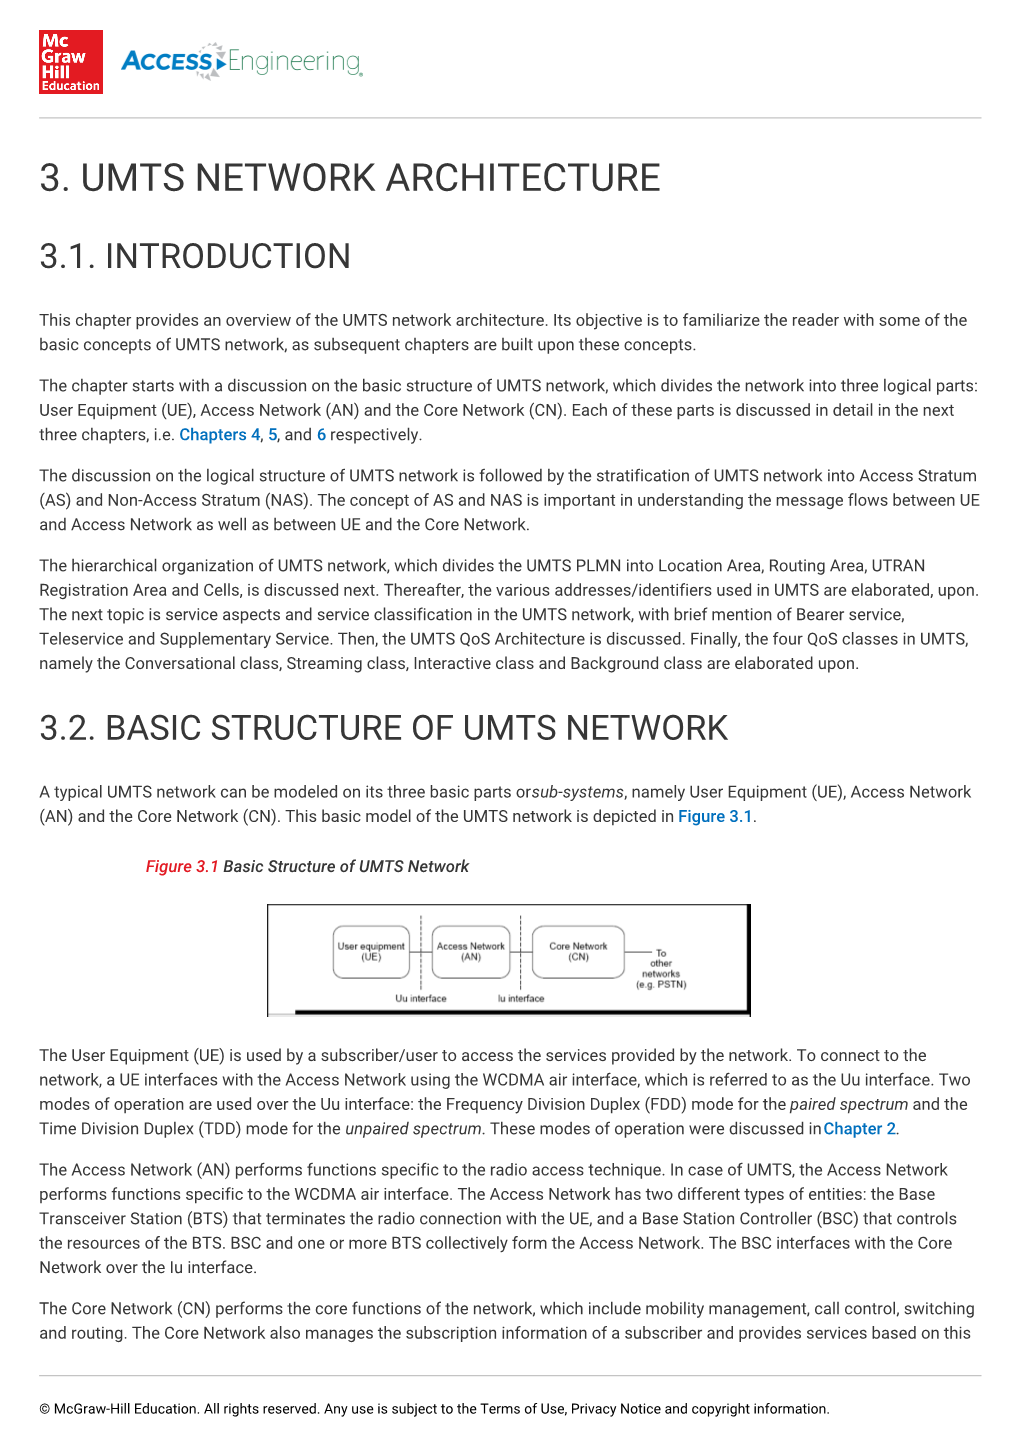 UMTS NETWORK ARCHITECTURE | Mcgraw-Hill Education